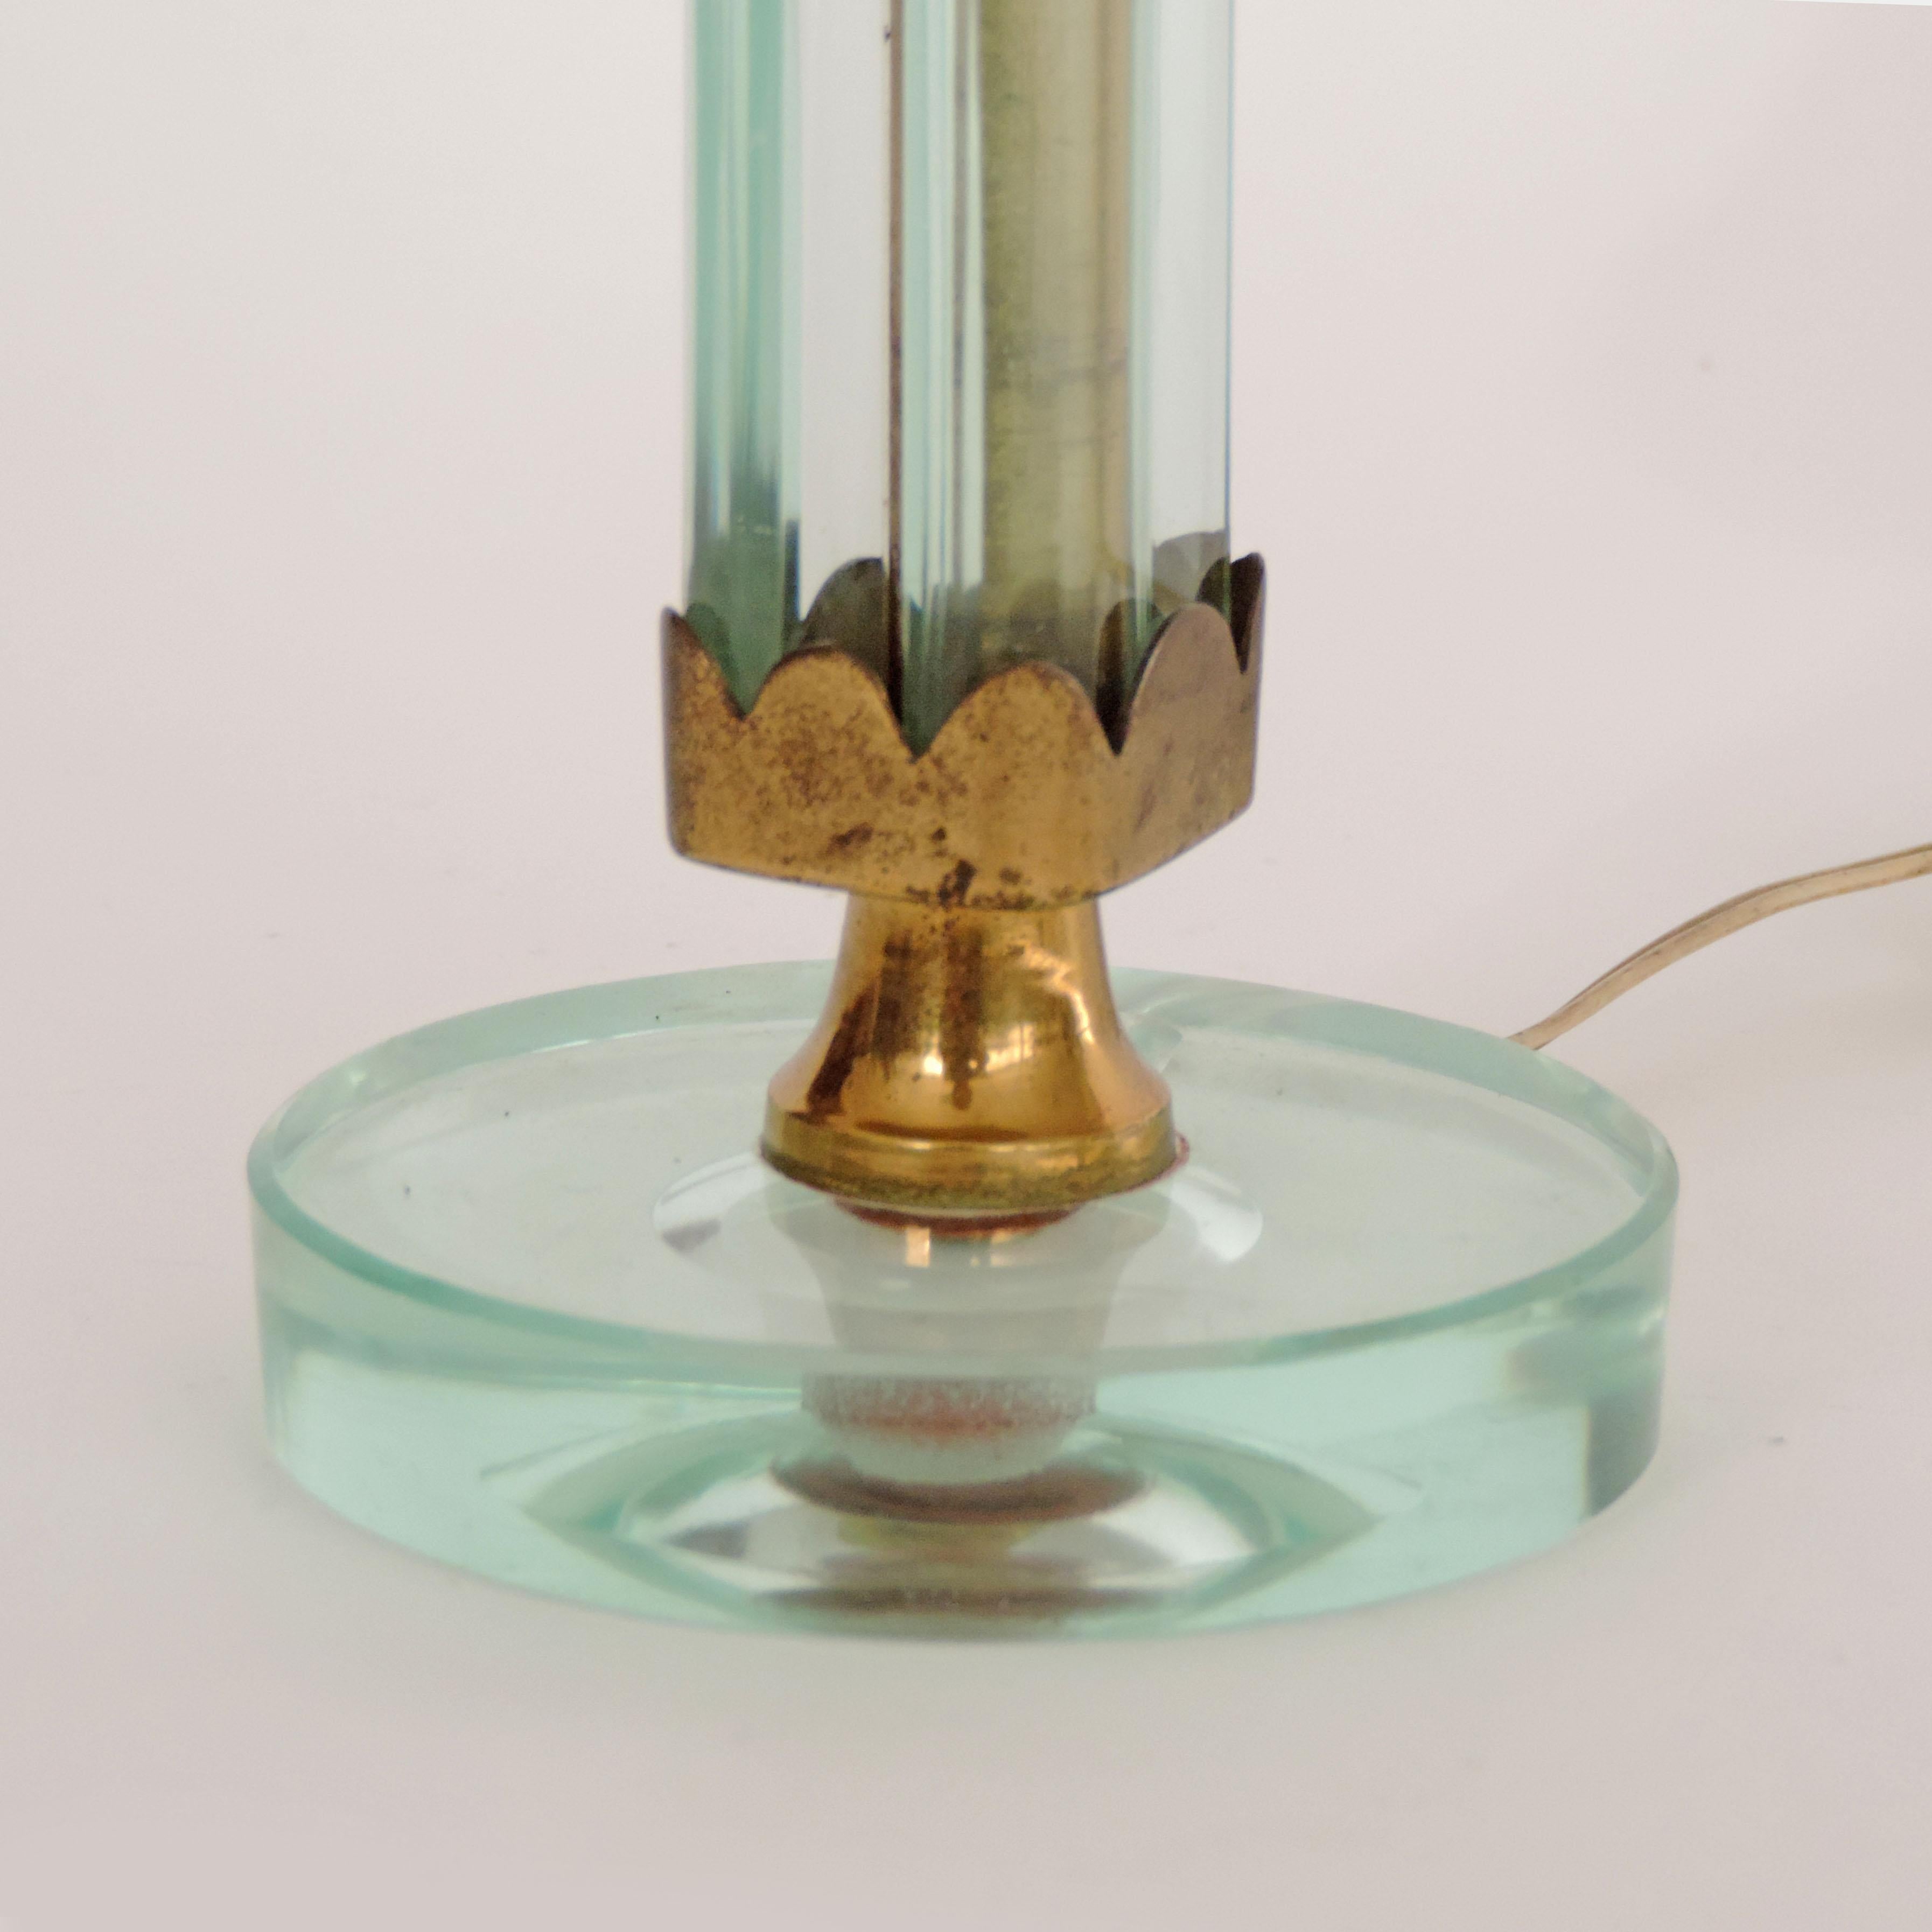 Small Italian 1940s glass and brass table lamp,
Attributed to Fontana Arte or Brusotti.